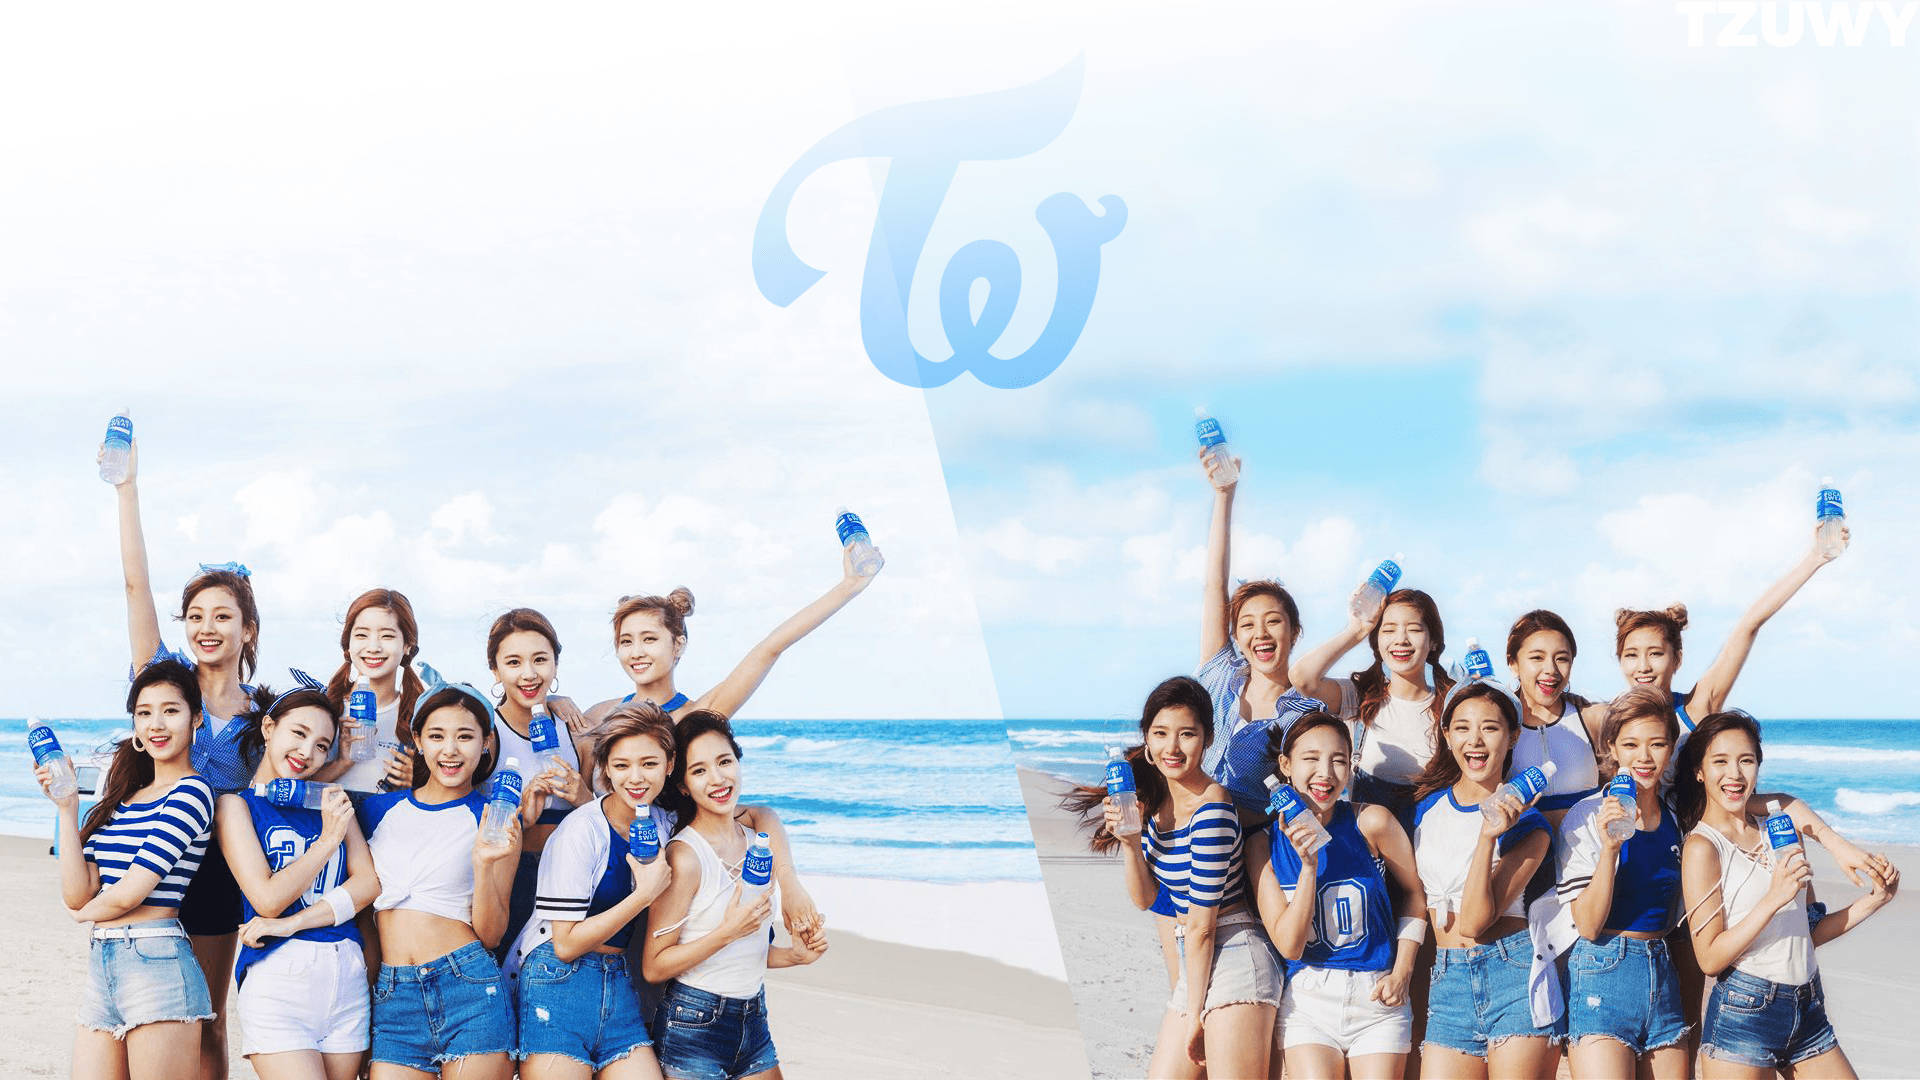 Twice 1920X1080 Wallpaper and Background Image